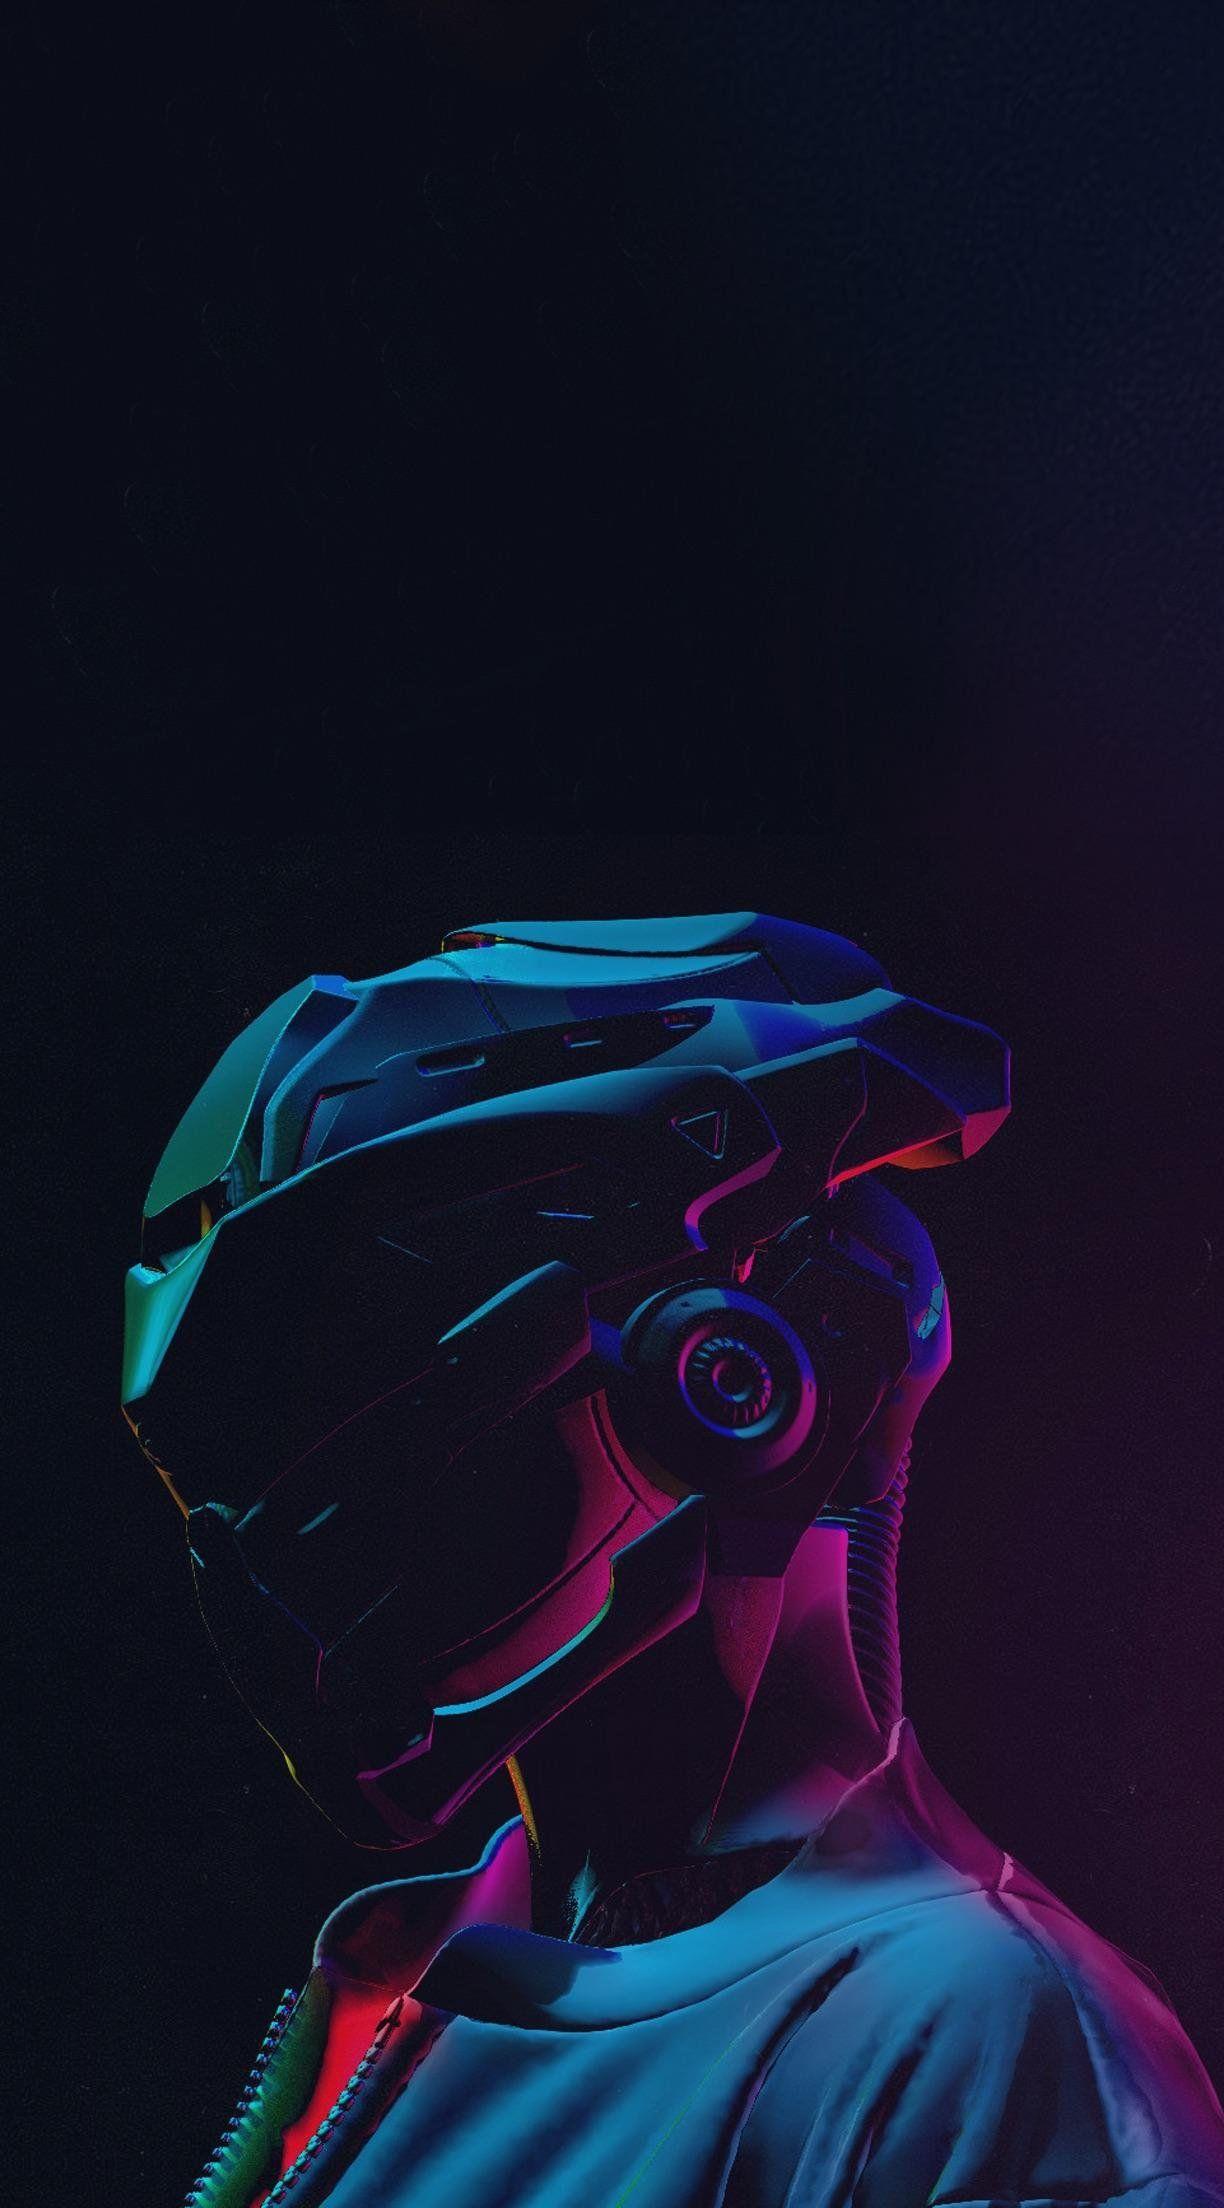 Cyberpunk style wallpapers I did for iPhone : cyberpunkgame